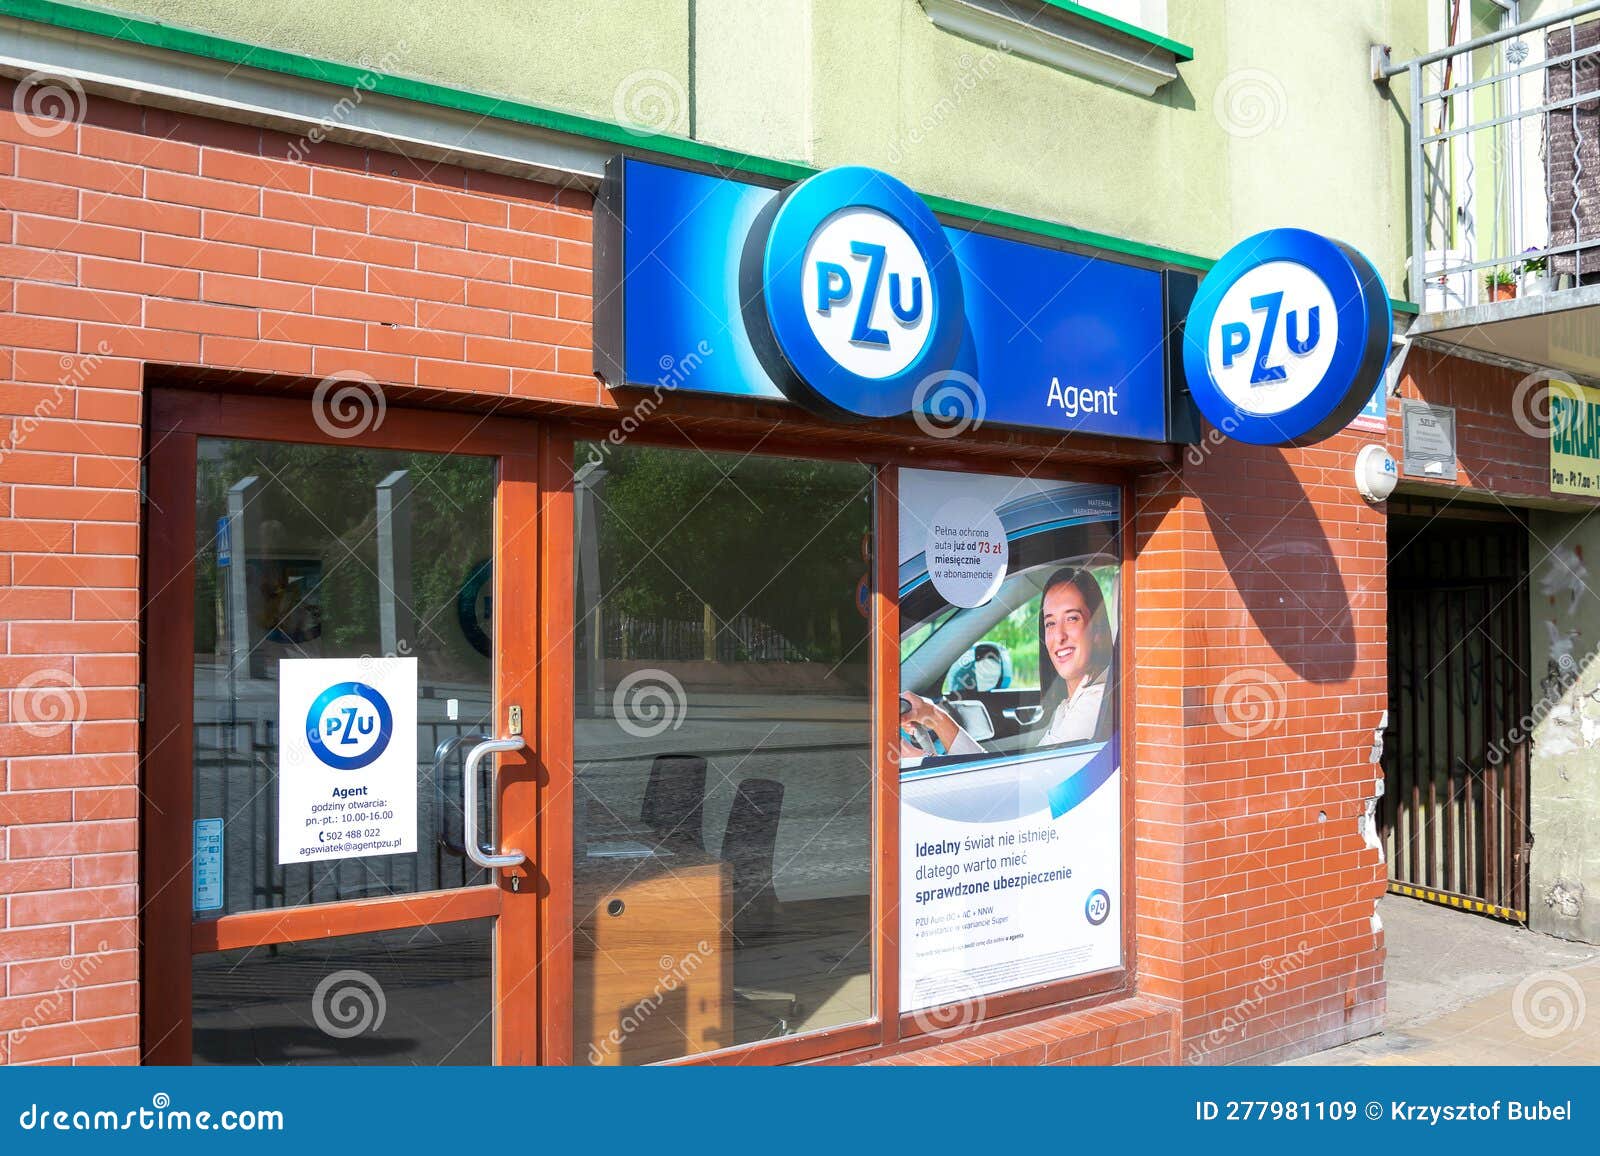 Pzu Stock Photos - & Royalty-Free Stock Photos from Dreamstime